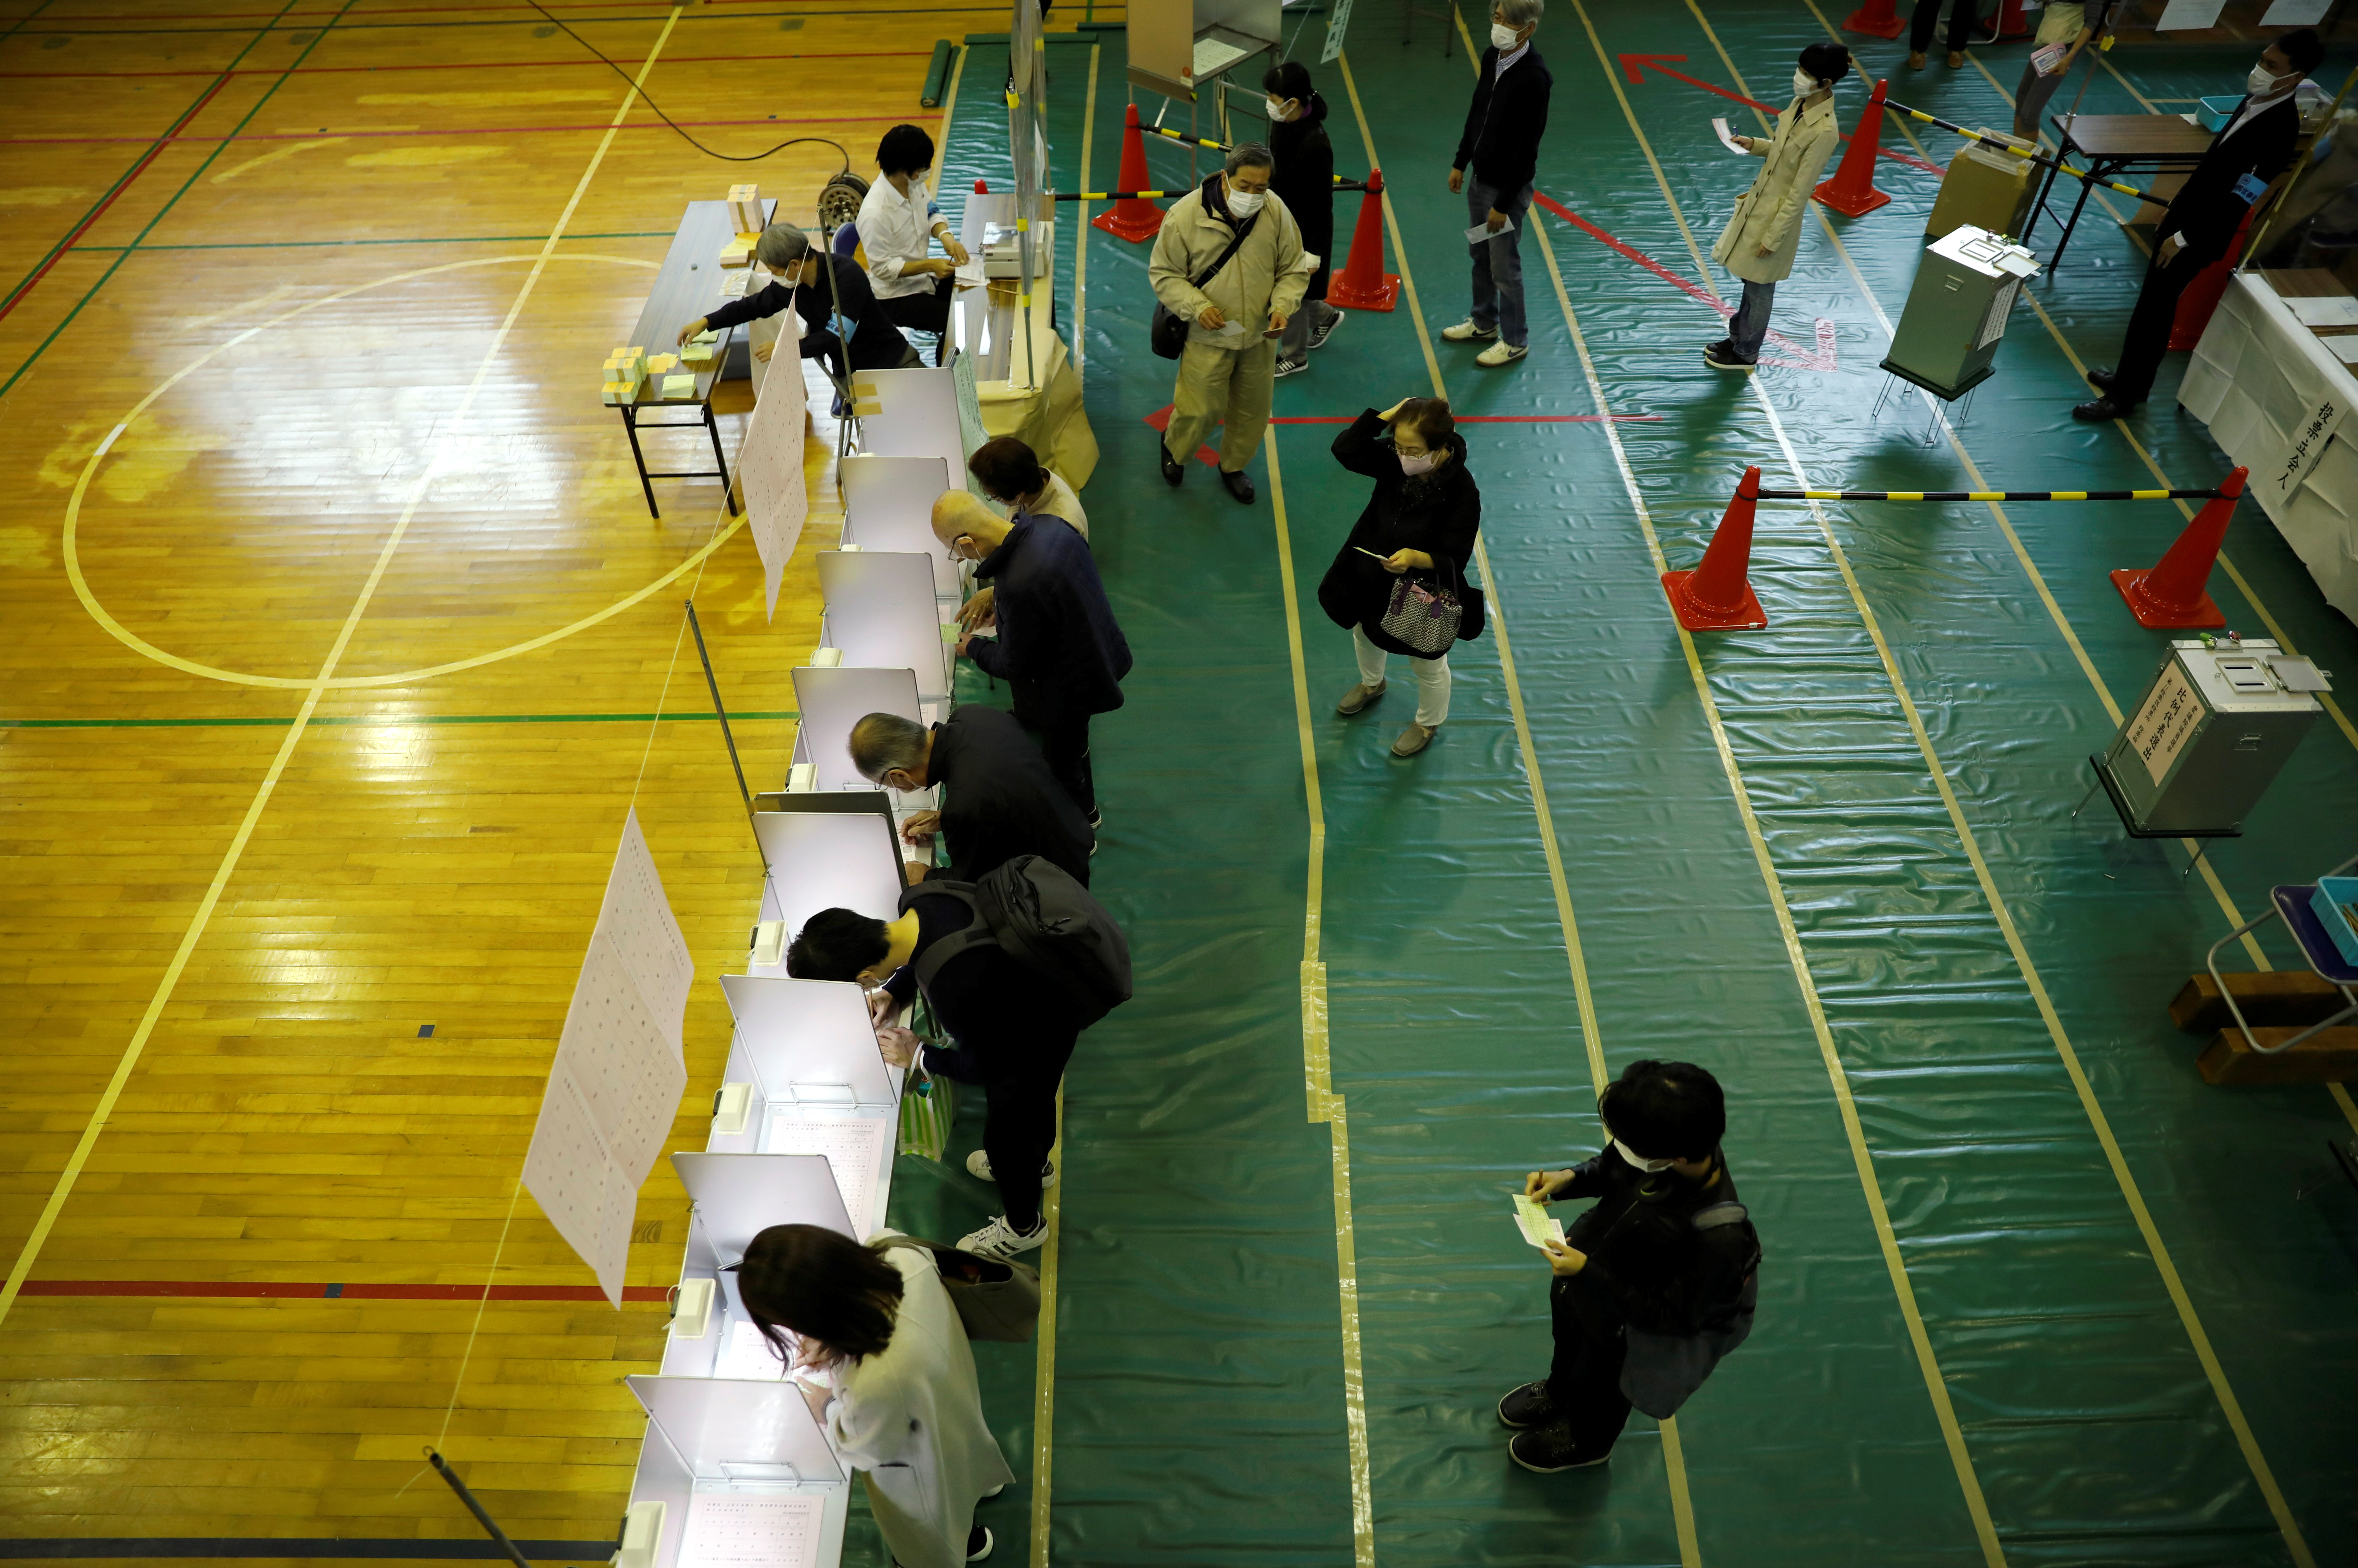 A voter casts a ballot in the lower house election at a polling station as other voters prepare their ballots, amid the coronavirus disease (COVID-19) pandemic, in Tokyo, Japan October 31, 2021.  REUTERS/Issei Kato